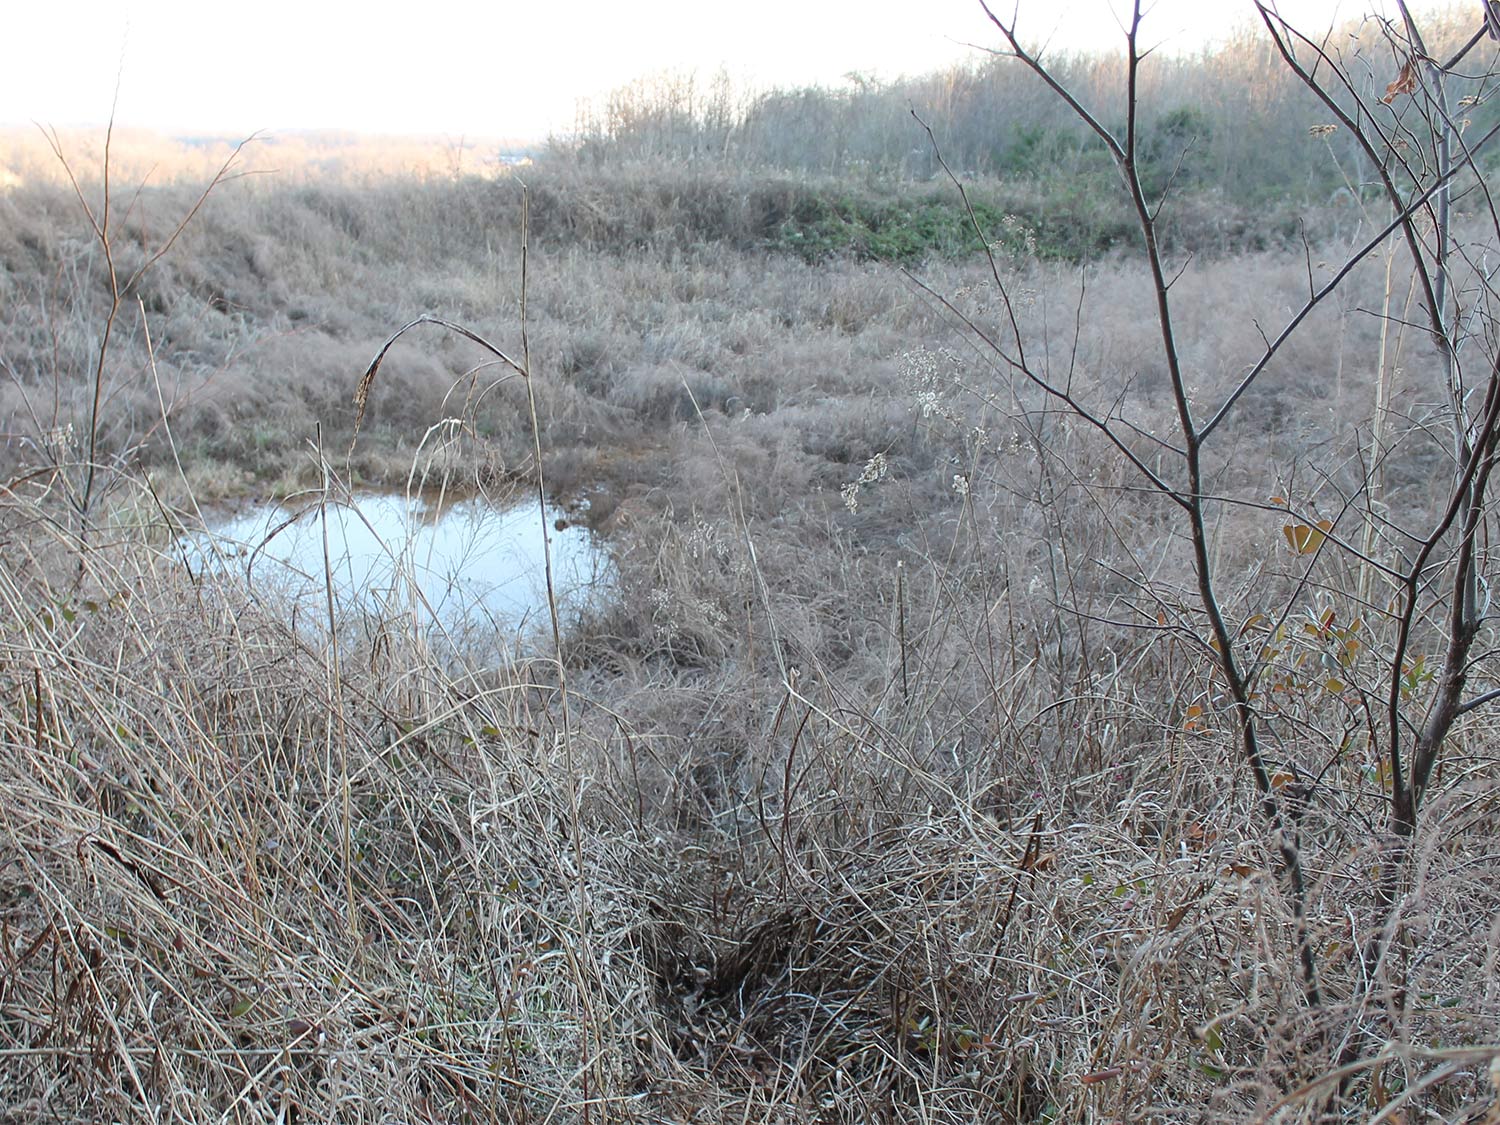 A small pond surrounded by dense brush.